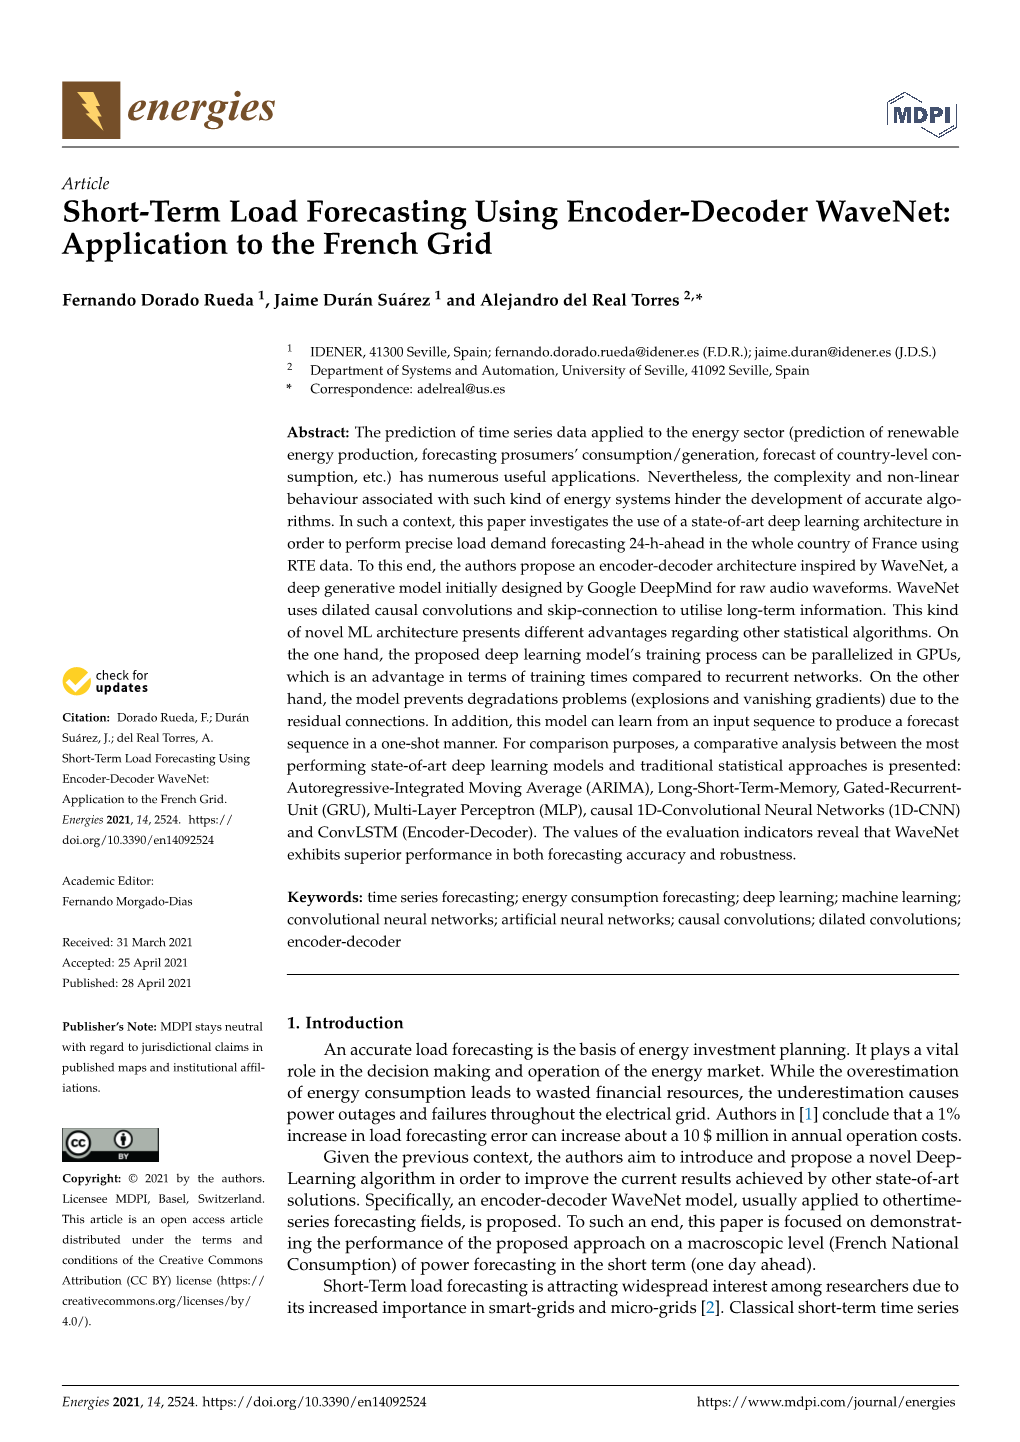 Short-Term Load Forecasting Using Encoder-Decoder Wavenet: Application to the French Grid